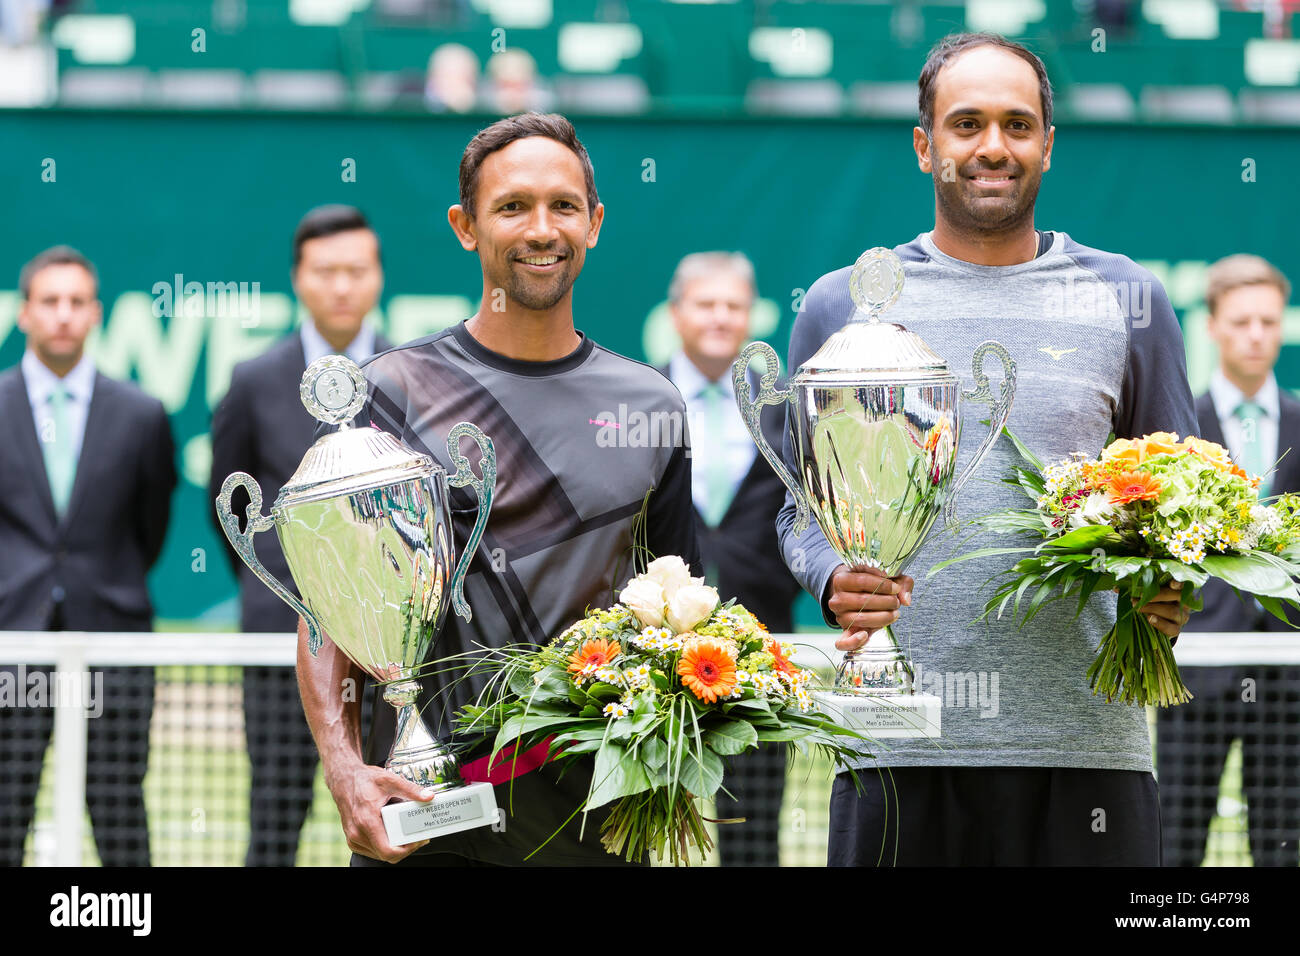 Halle, Germany. 19th June, 2016. Raven Klaasen (RSA) and Rajeev Ram (USA)  defeated Alexander Peya (AUT) and Lukasz Kubot (POL) in the doubles final  of the 2016 Gerry-Weber-Open in Halle, Germany in